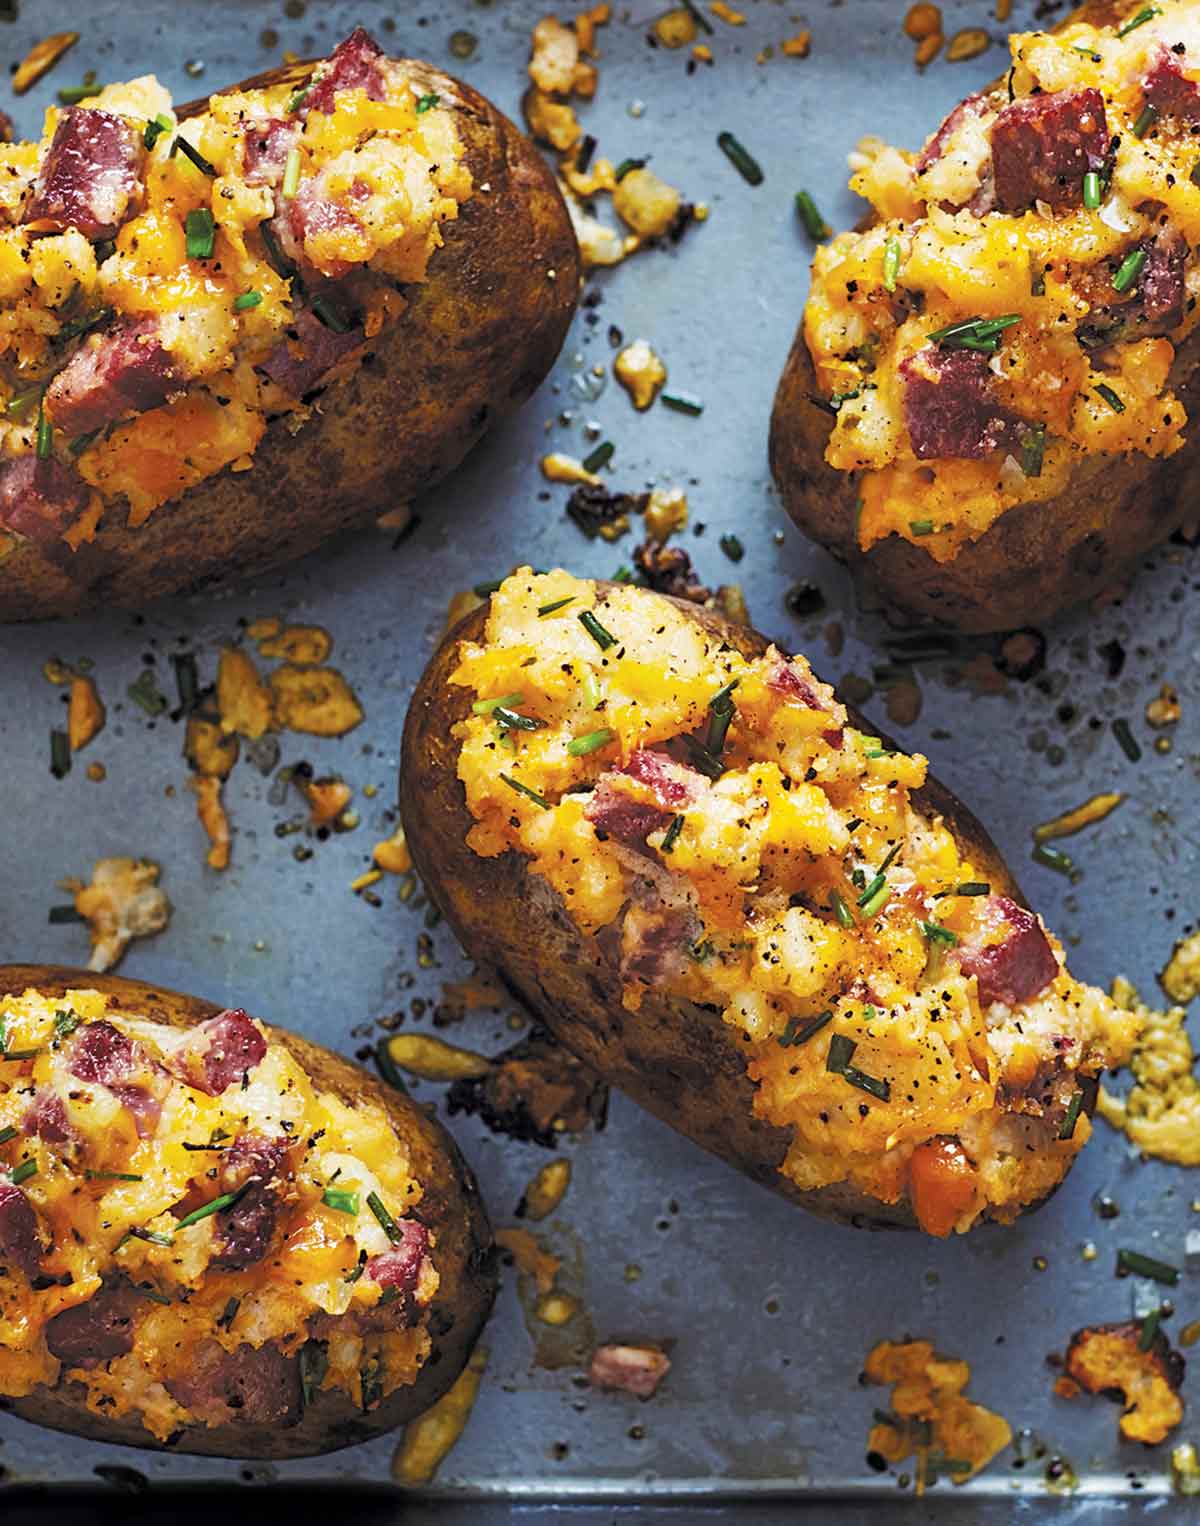 Four twice-baked potatoes with corned beef on a baking sheet.